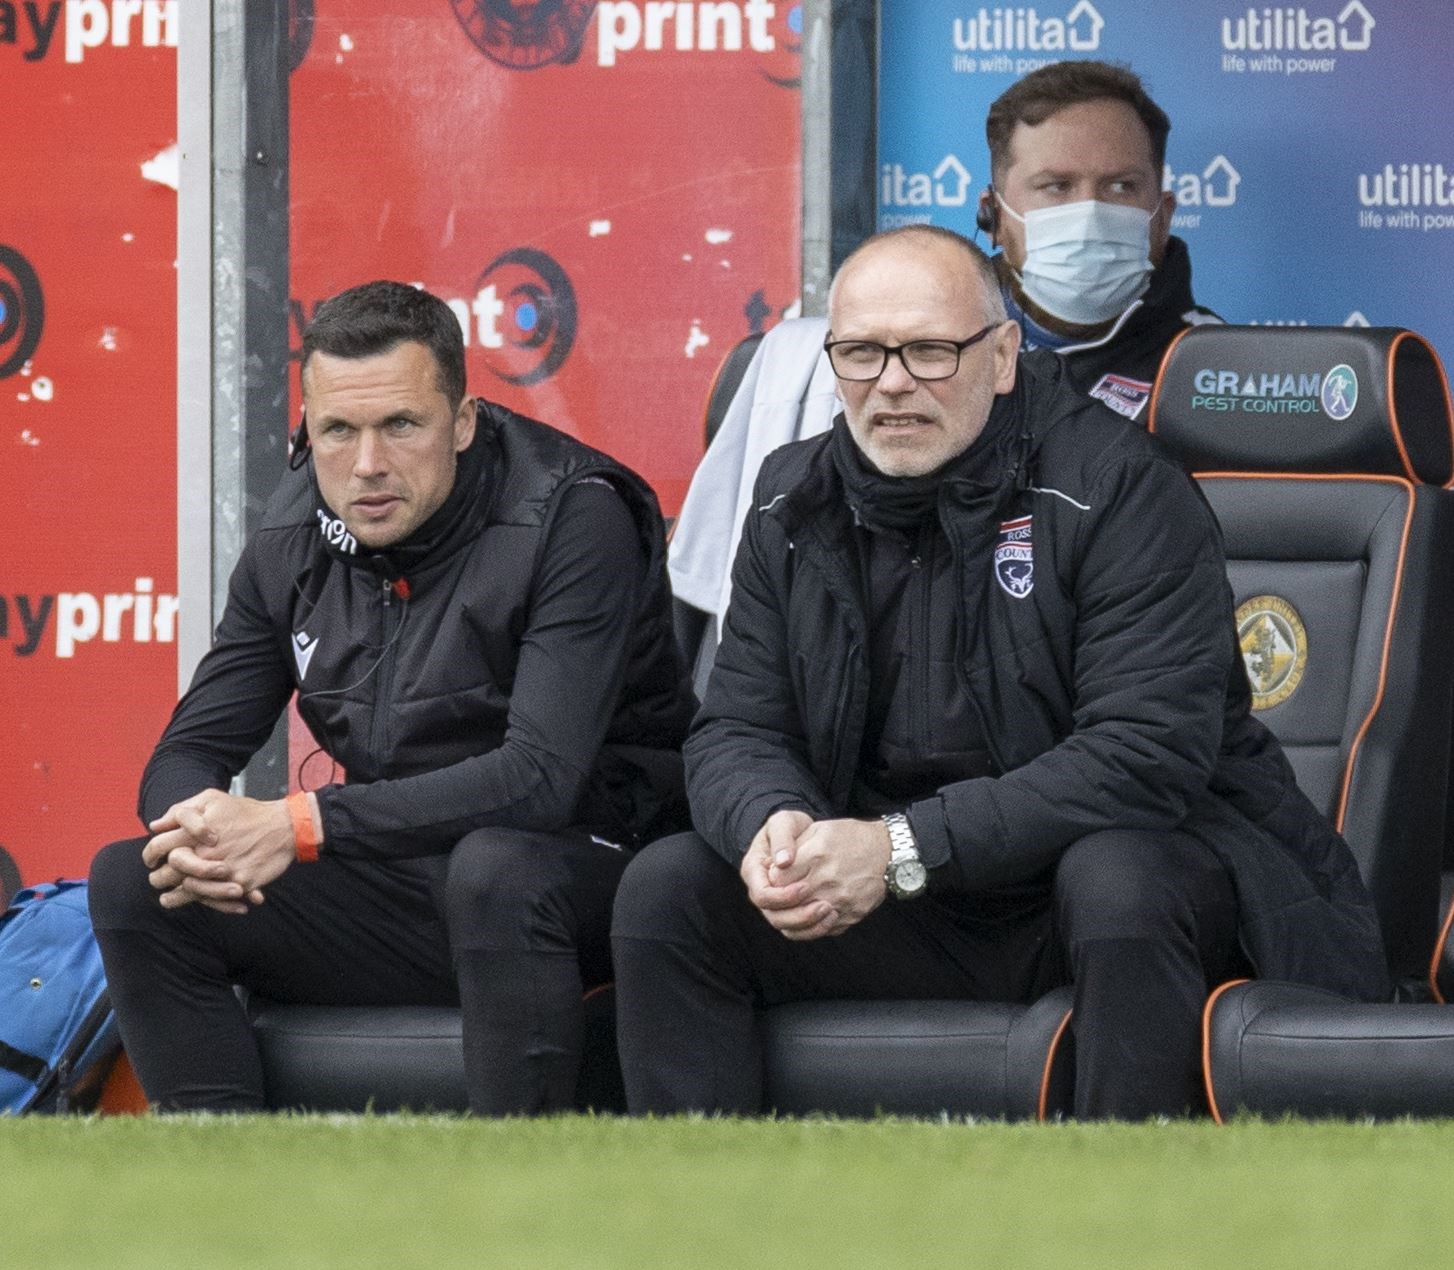 Ross County are looking for a new manager after John Hughes' departure – and Don Cowie is reportedly one of the names in contention to replace him.